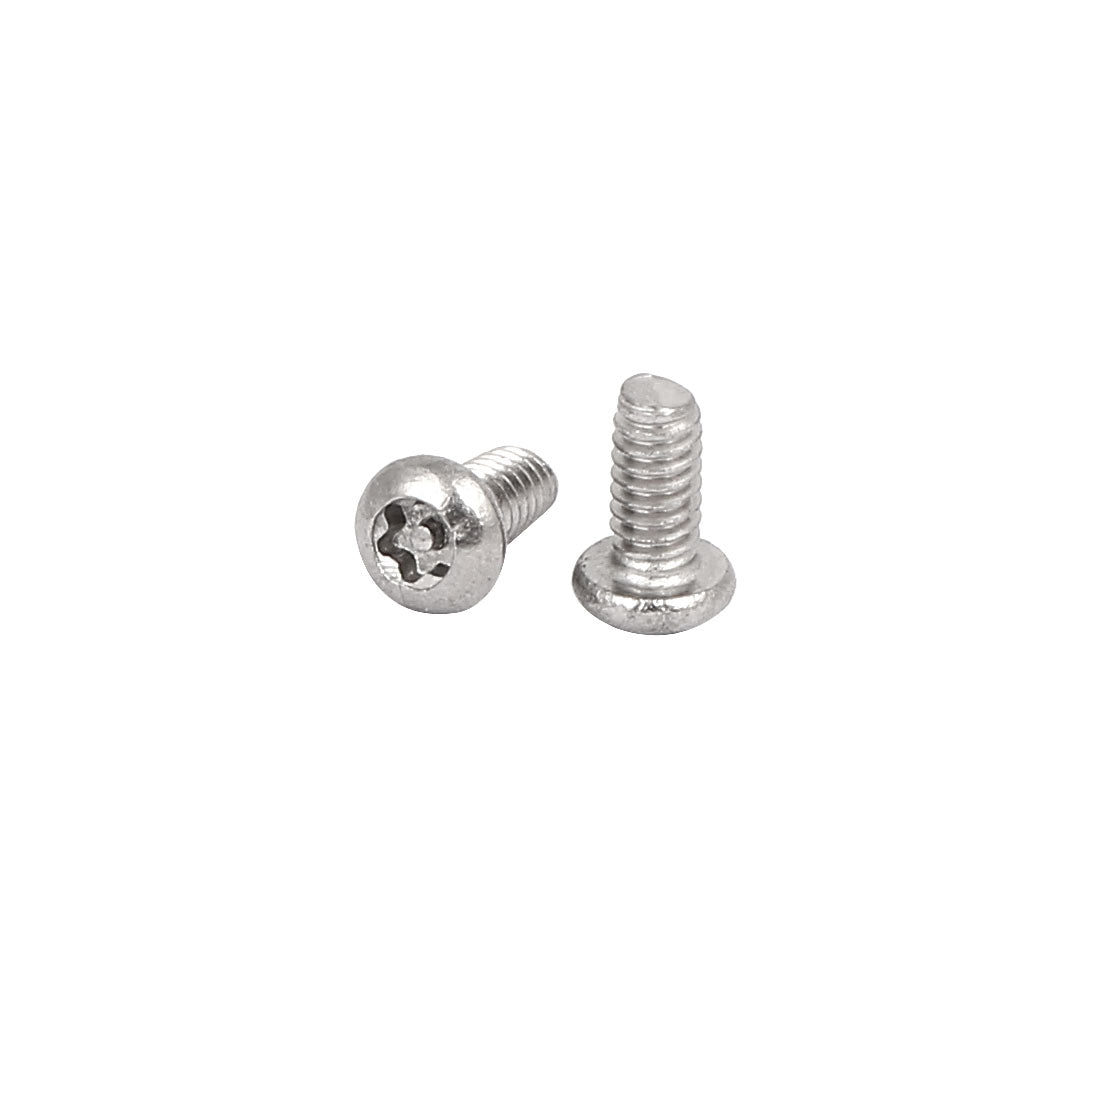 uxcell Uxcell M2x4mm 304 Stainless Steel Button Head Torx Security Machine Screws 50pcs